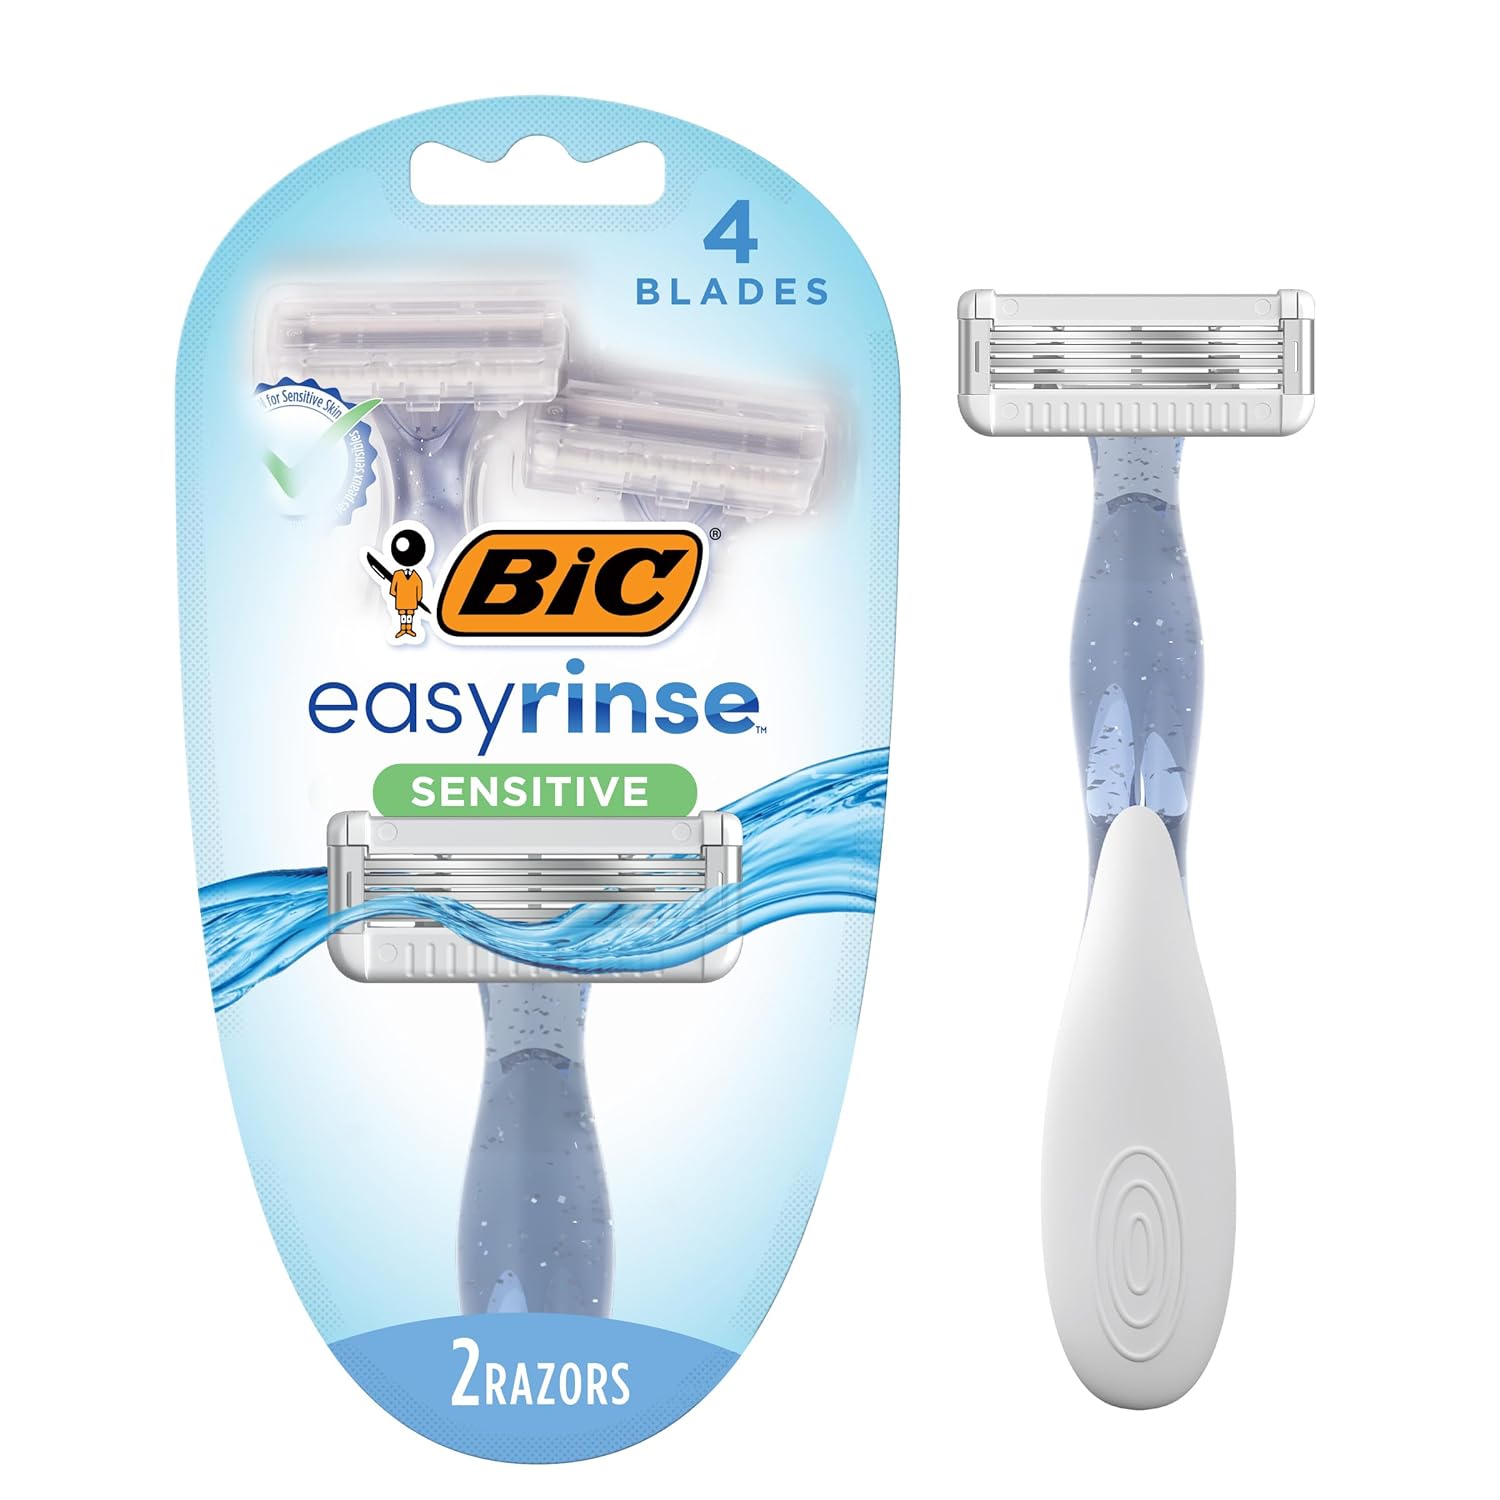 BIC EasyRinse Sensitive Anti-Clogging Women' Disposable Razors, Clinically Proven for Sensitive Skin, Shaving Razors With 4 Blades, 2 Count